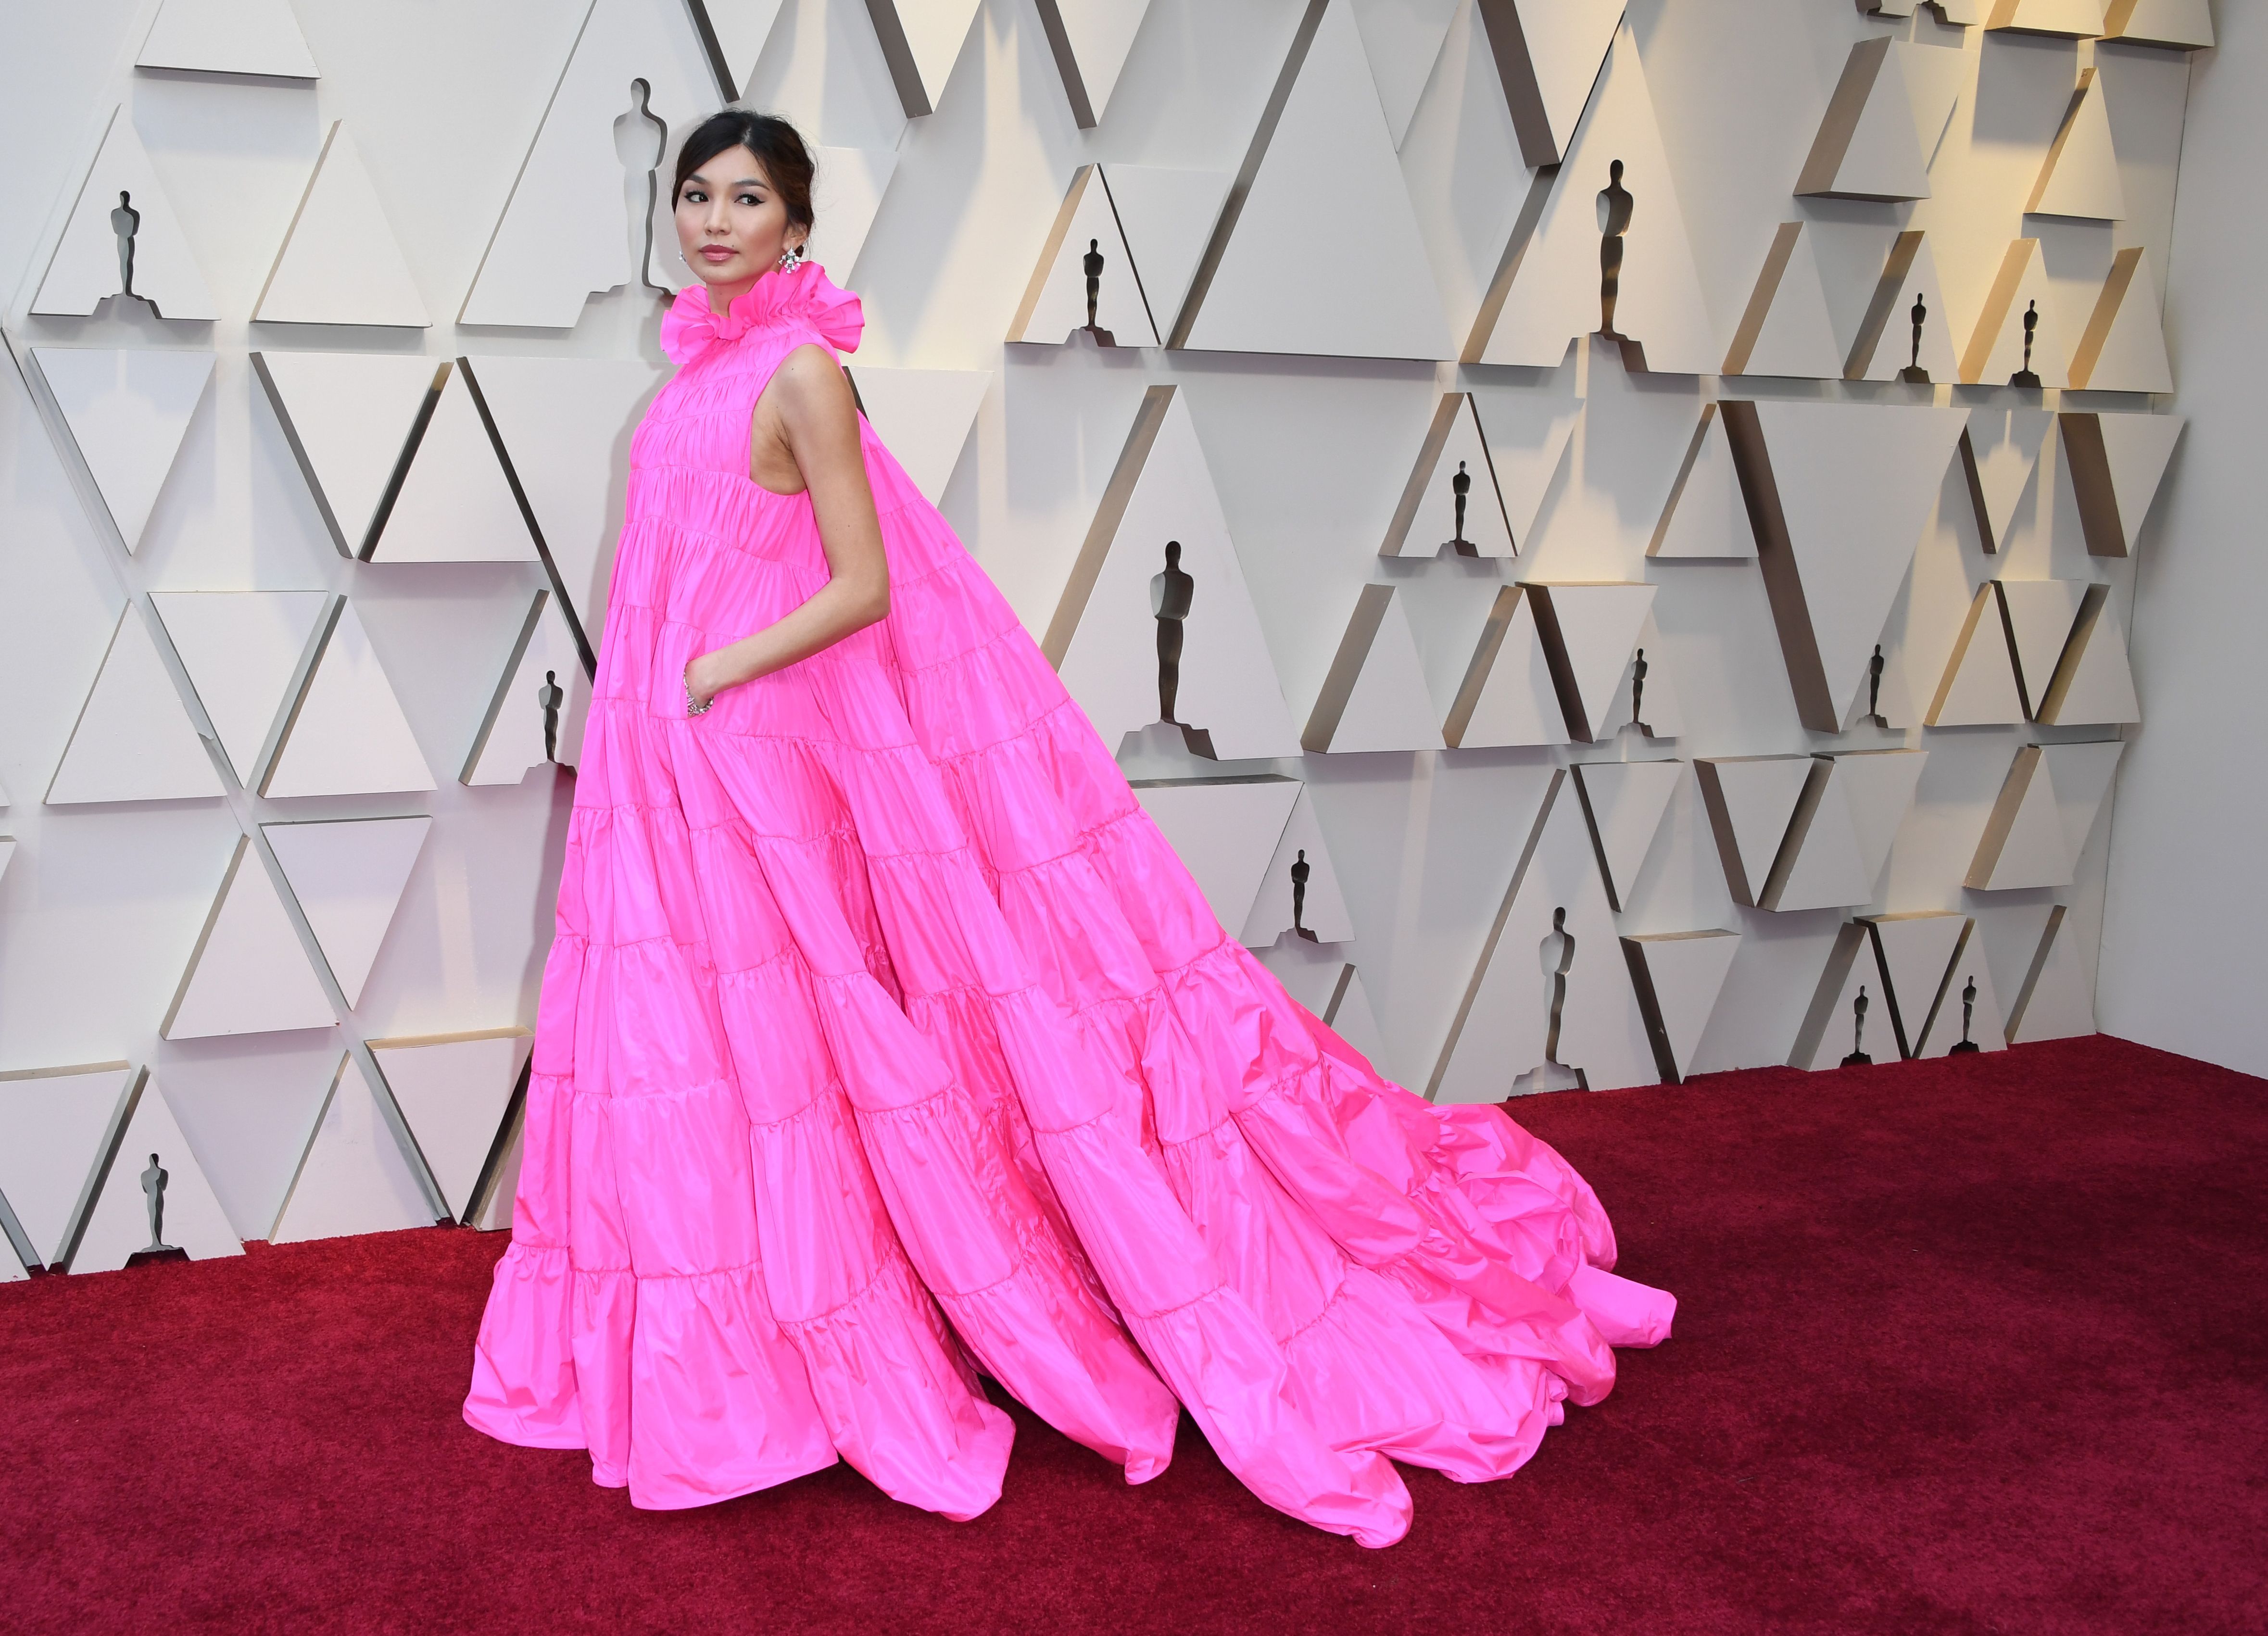 Oscars 2019 Fashion: Pink Ruffled Dresses Are The Order Of The Night